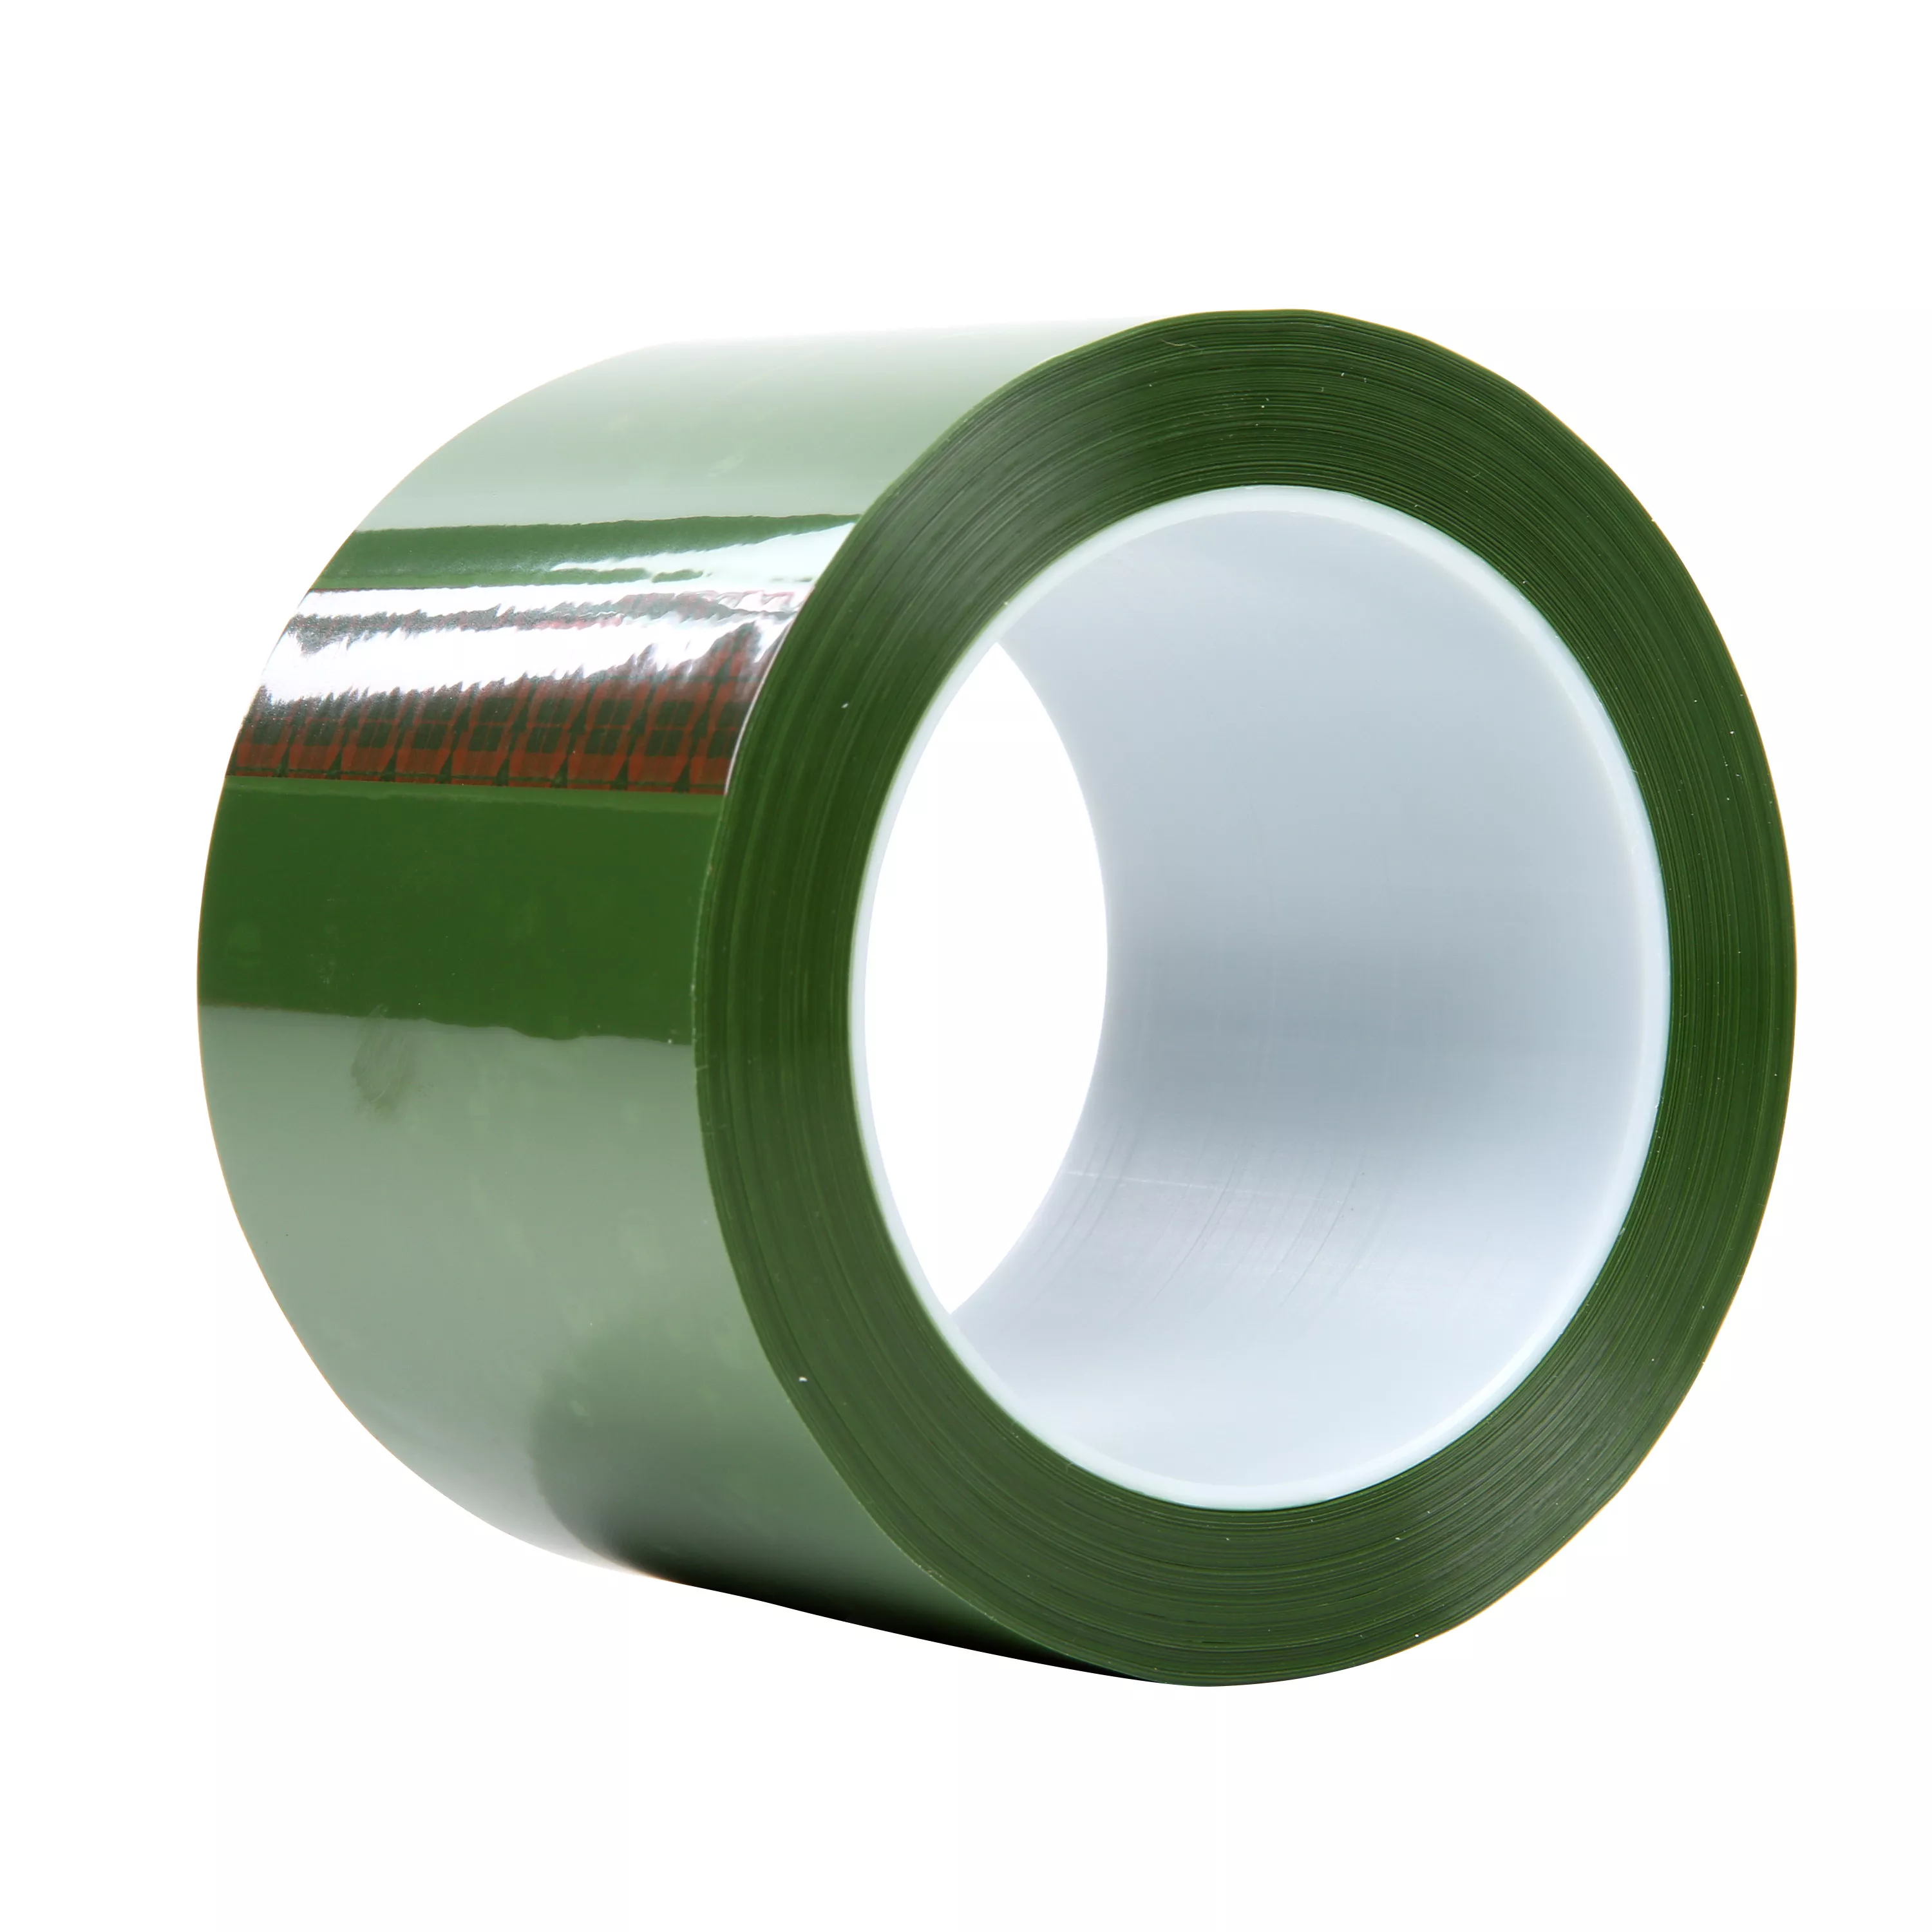 3M™ Polyester Tape 8403, Green, 3 in x 72 yd, 2.4 mil, 12 Roll/Case